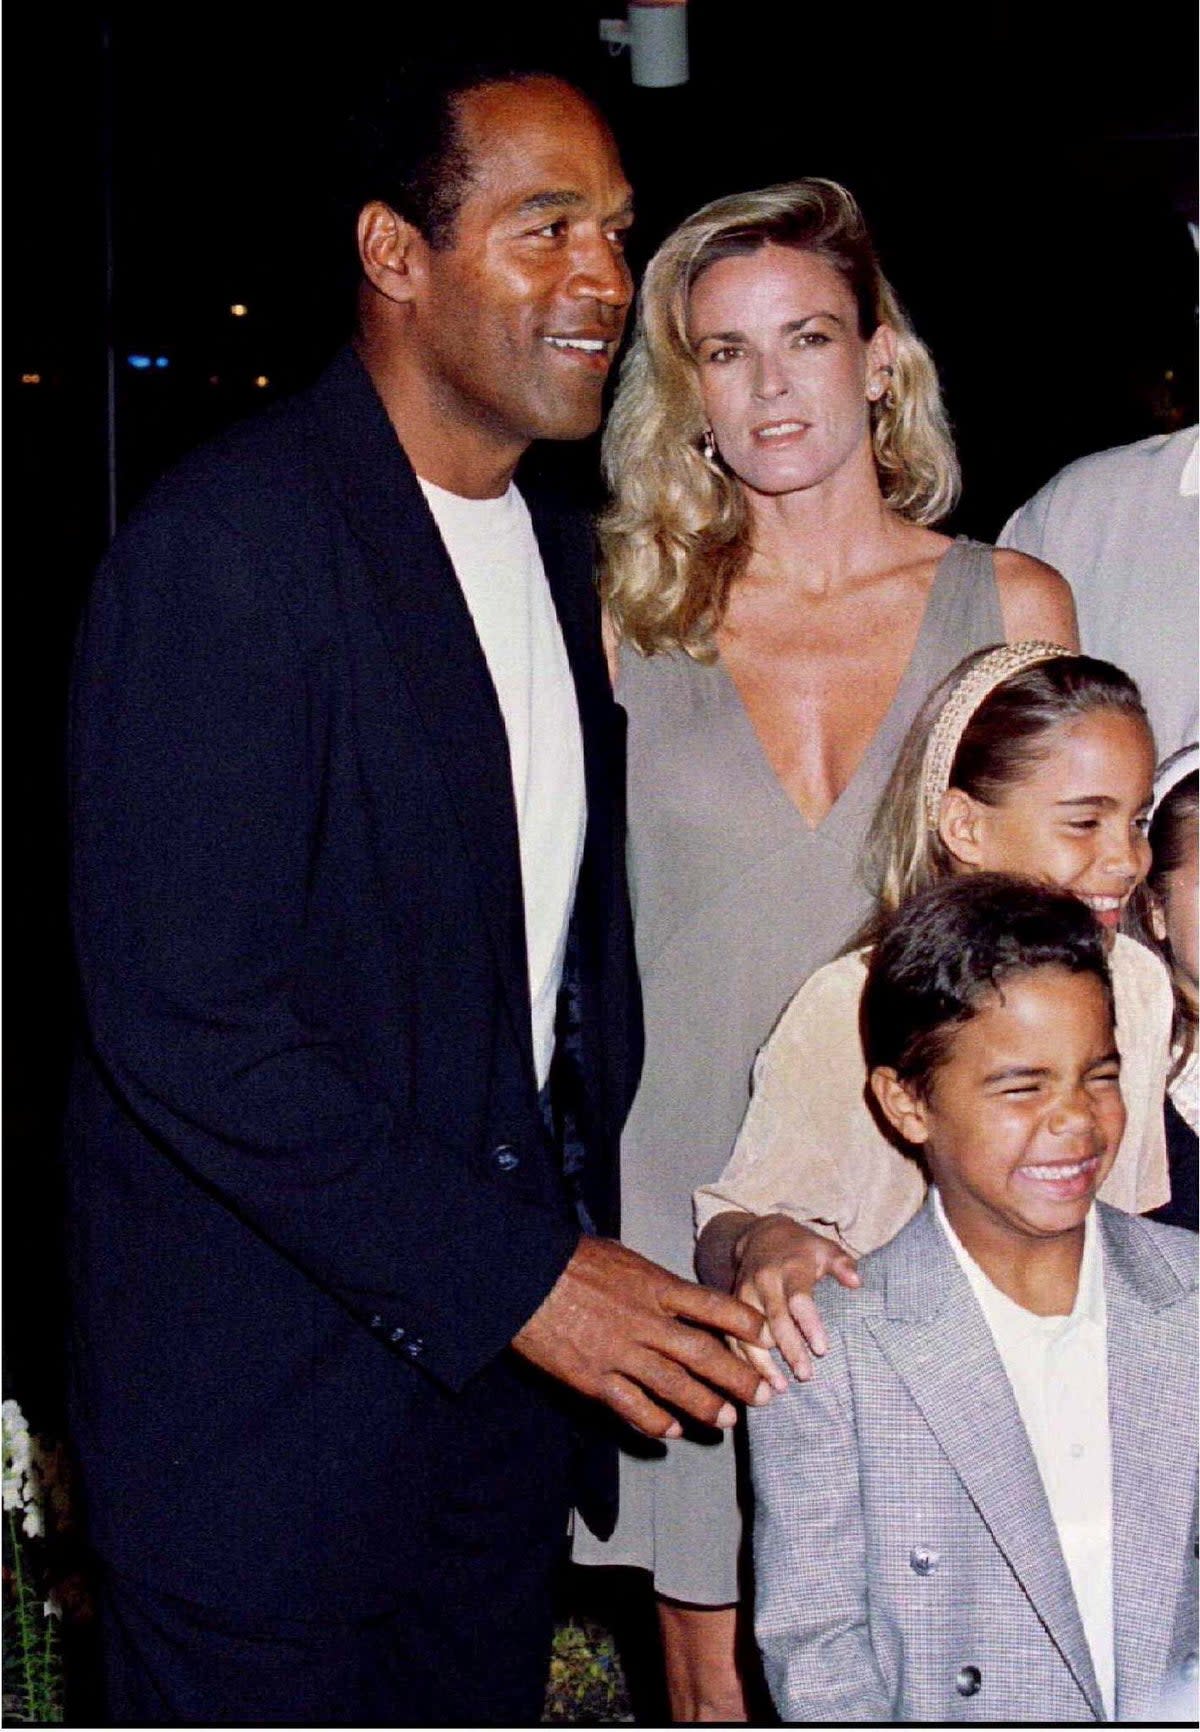 O.J. Simpson is shown with his late ex-wife Nicole Simpson and their children, daughter Sydney Brooke, 9, and son Justin, 6. (REUTERS)